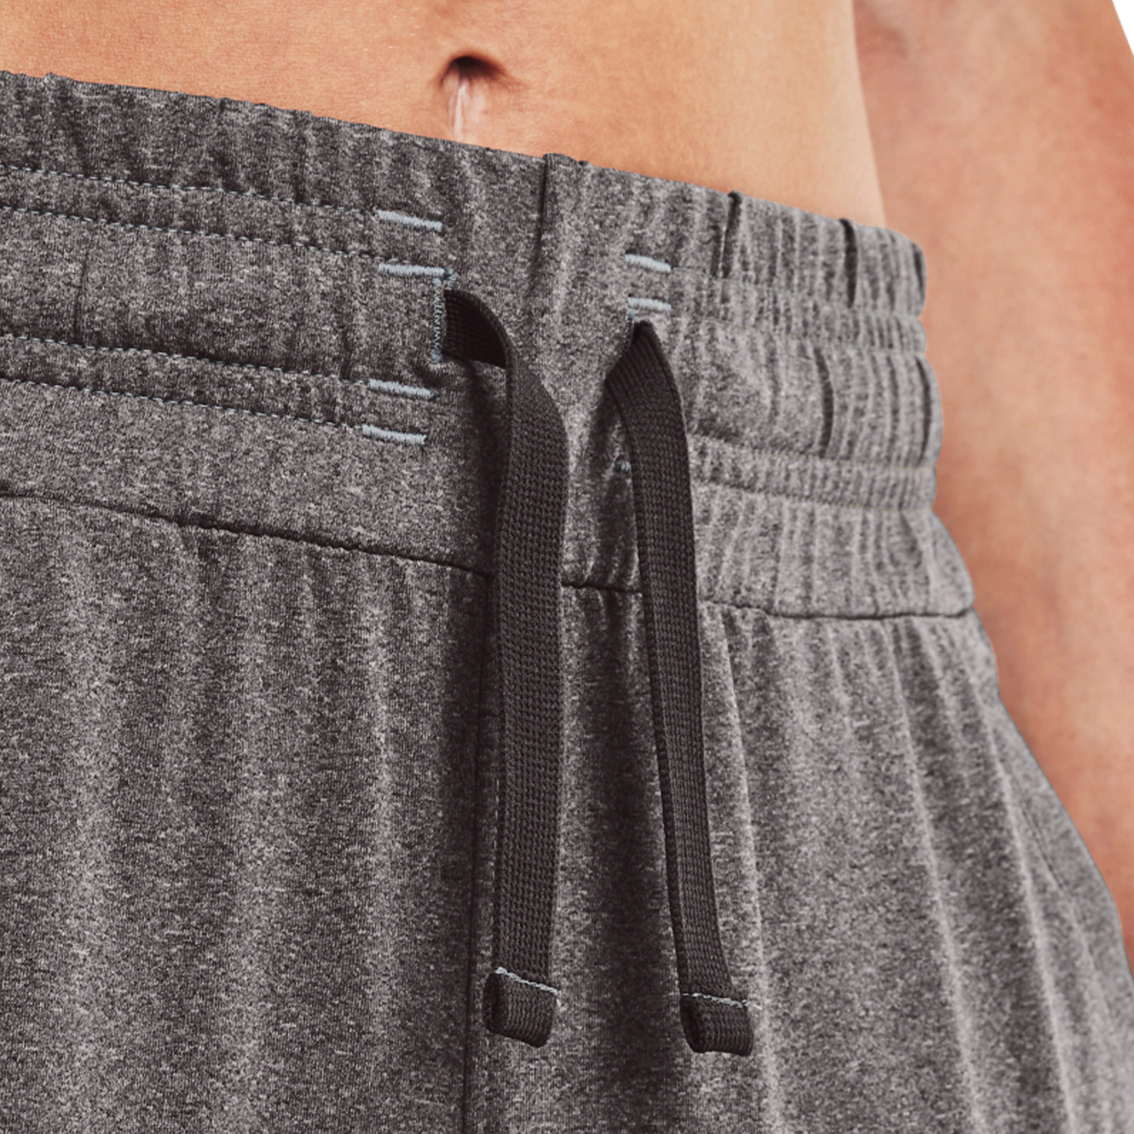 Under Armour New Fabric HG Armour Pants - Image 3 of 5